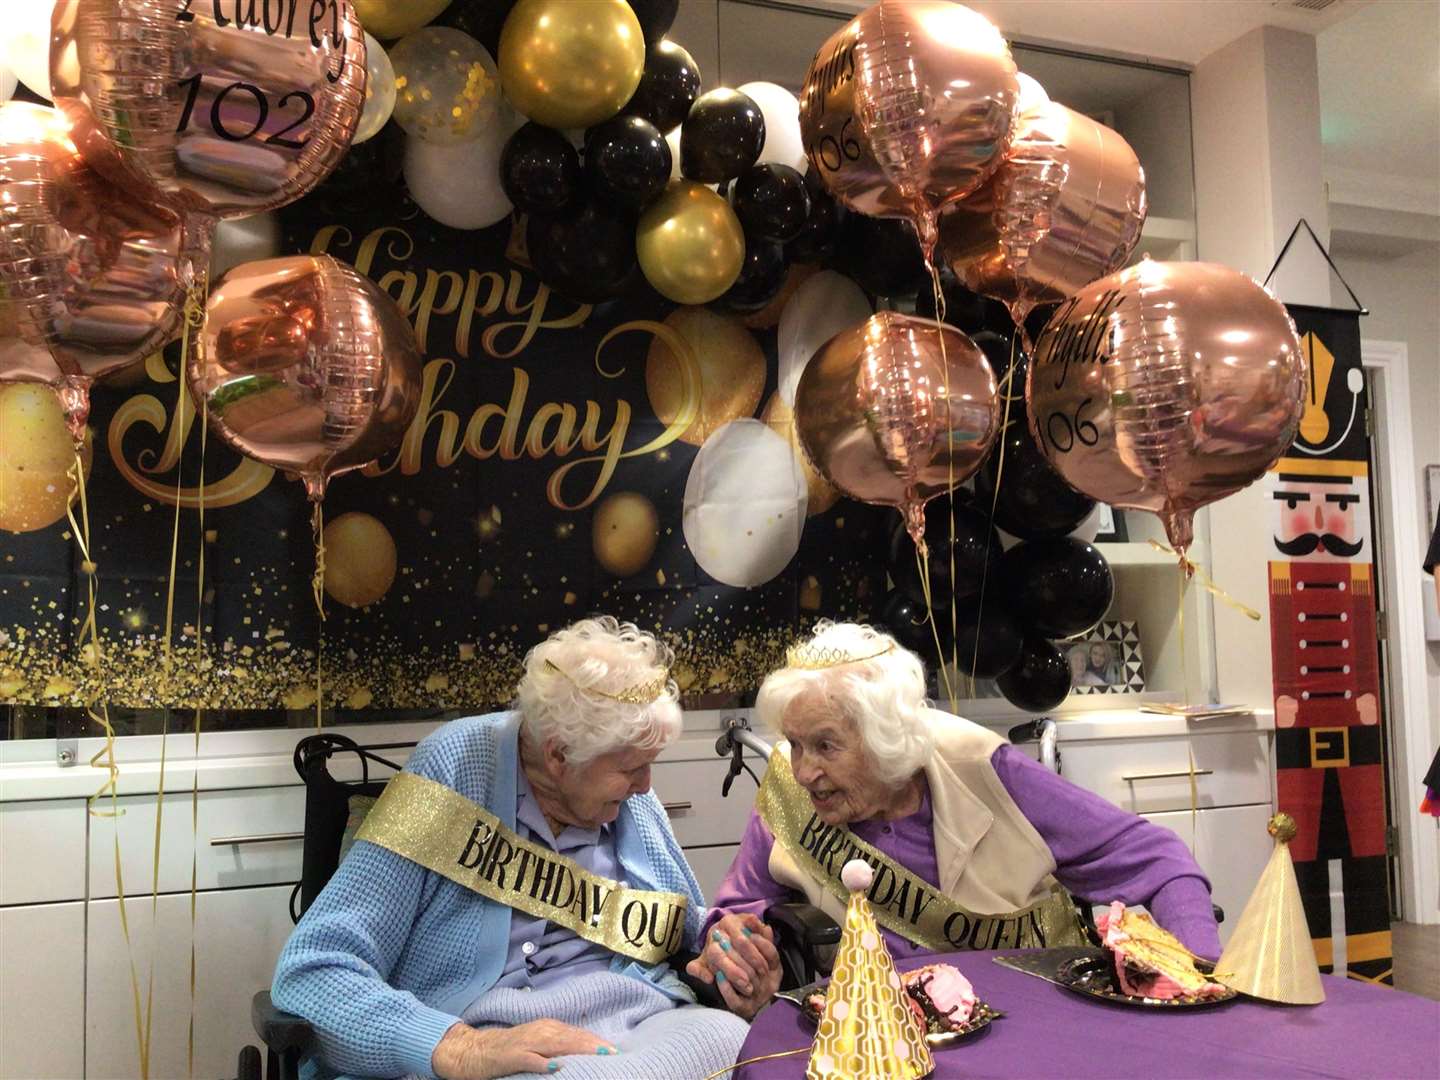 Care UK’s Amherst House threw the two centenarians a surprise birthday party with friends, balloons and cake (Care UK)